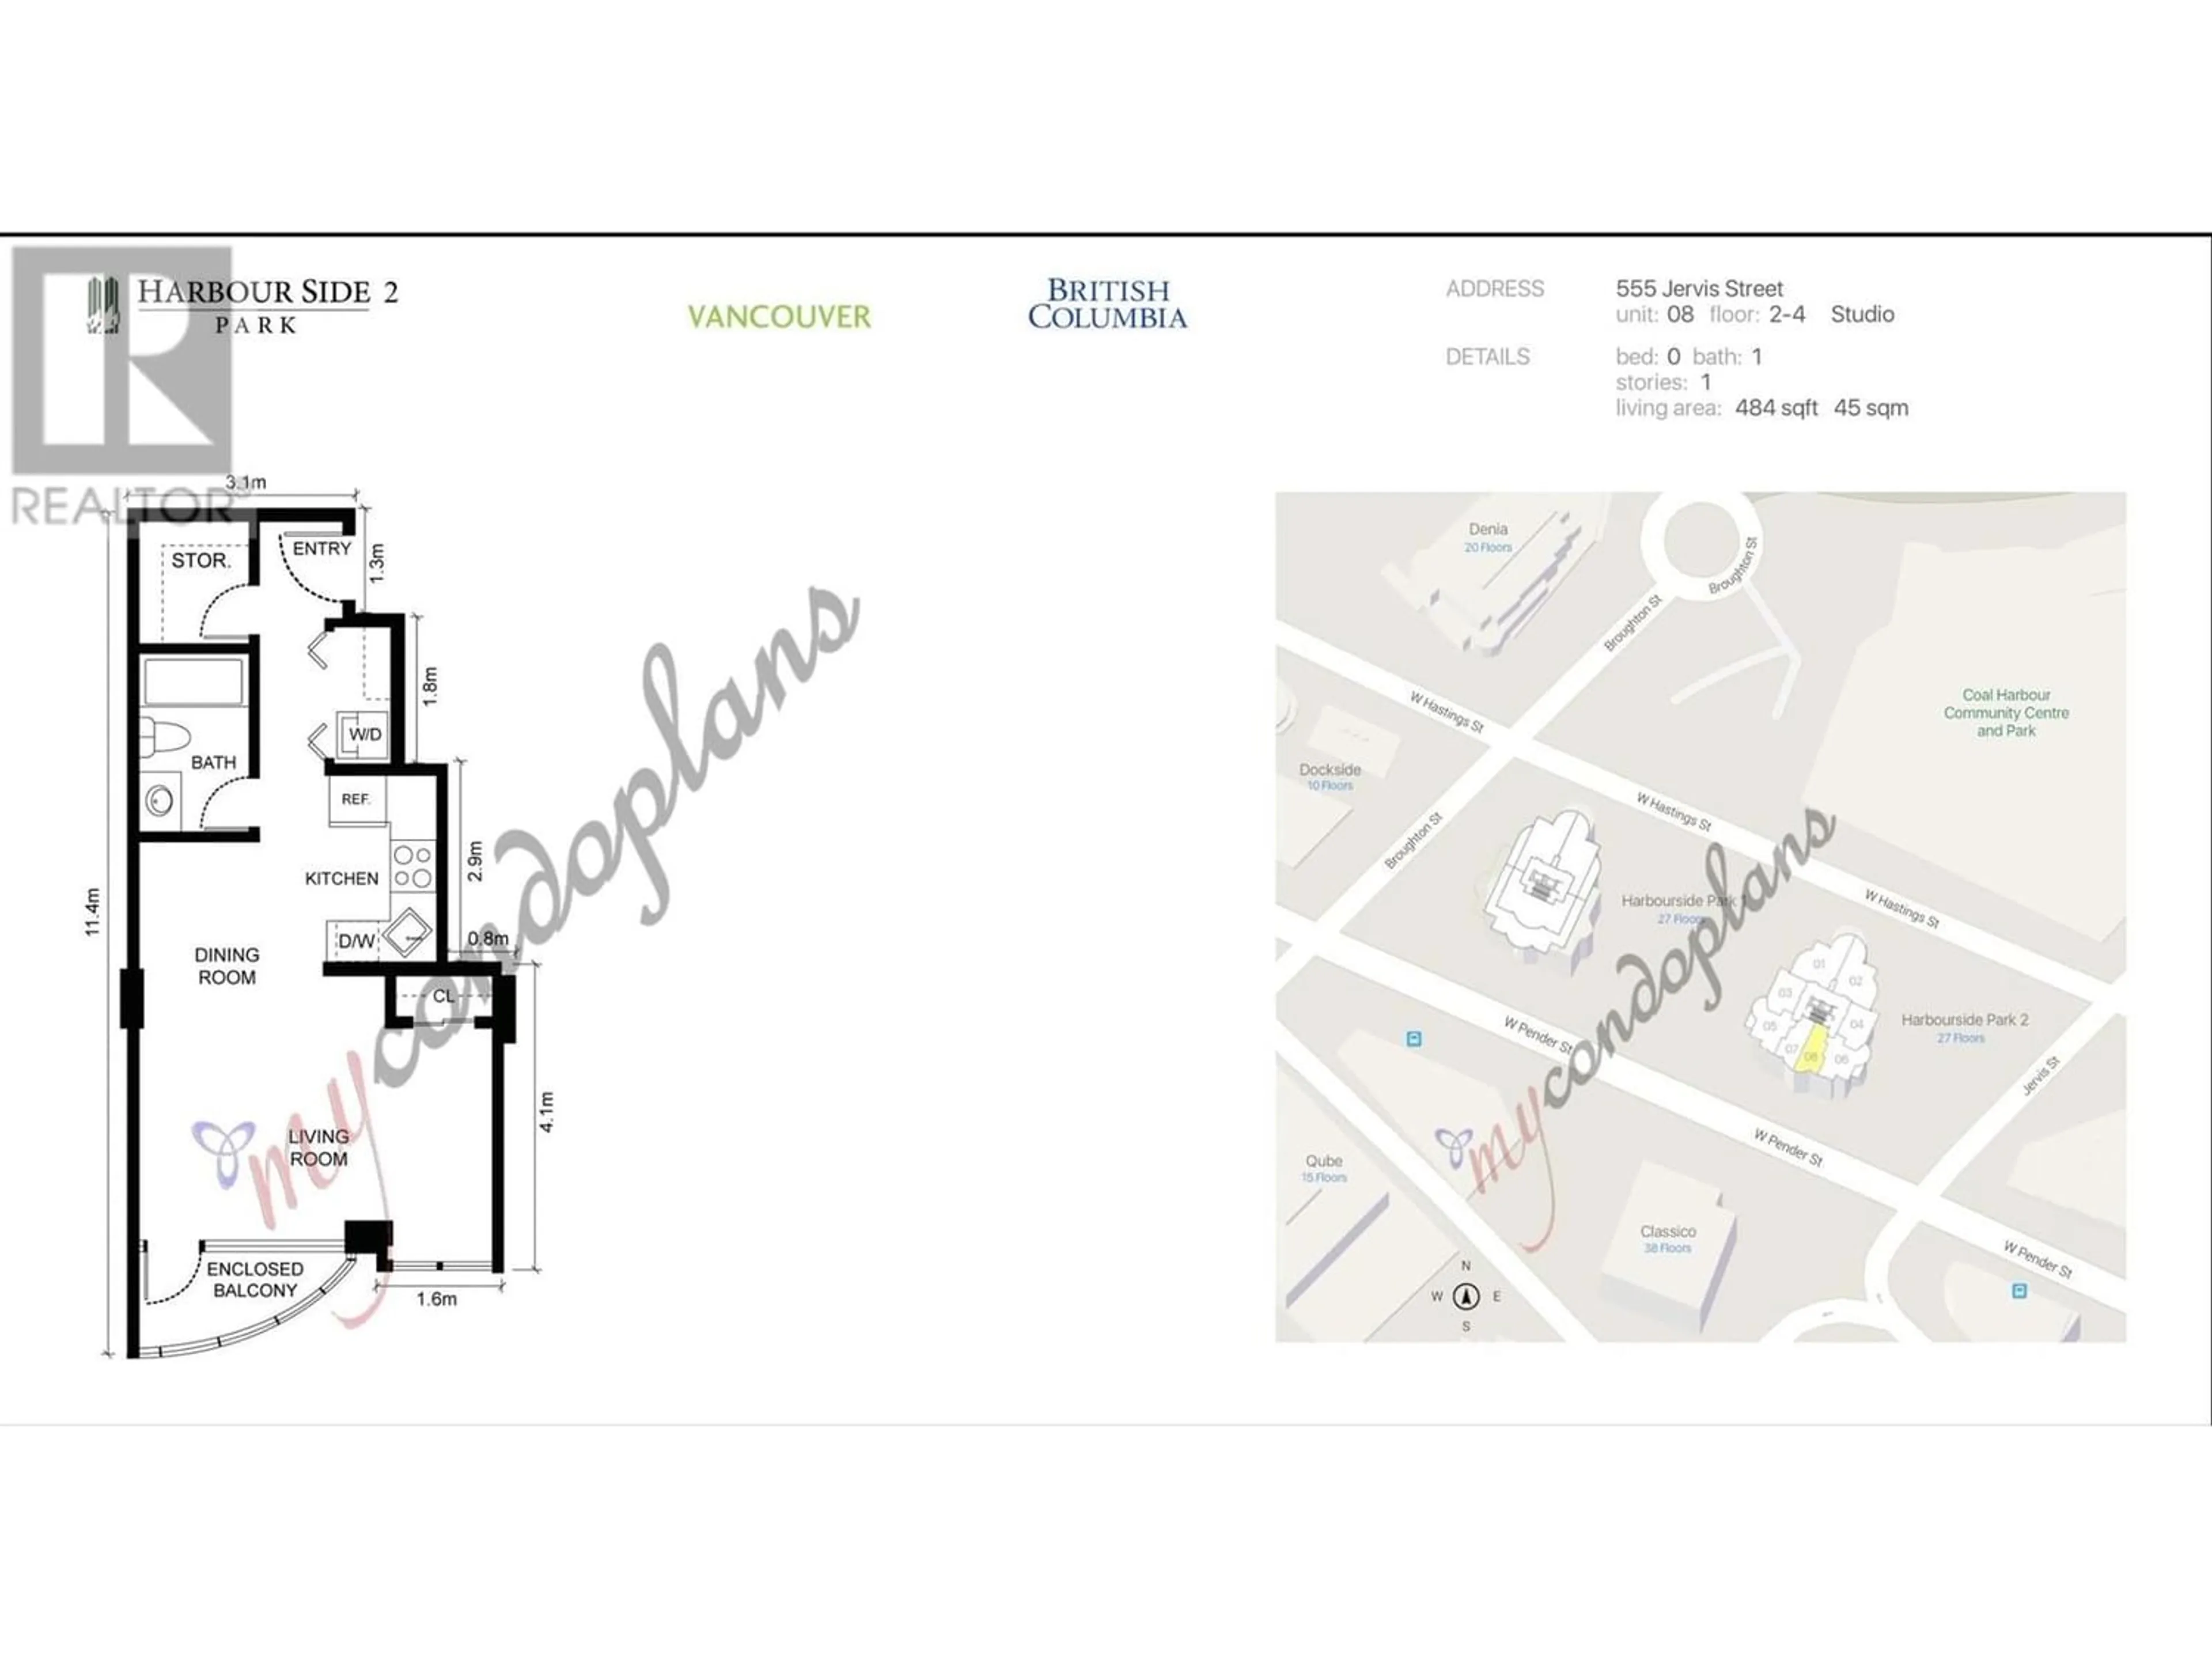 Floor plan for 208 555 JERVIS STREET, Vancouver British Columbia V6E4N1